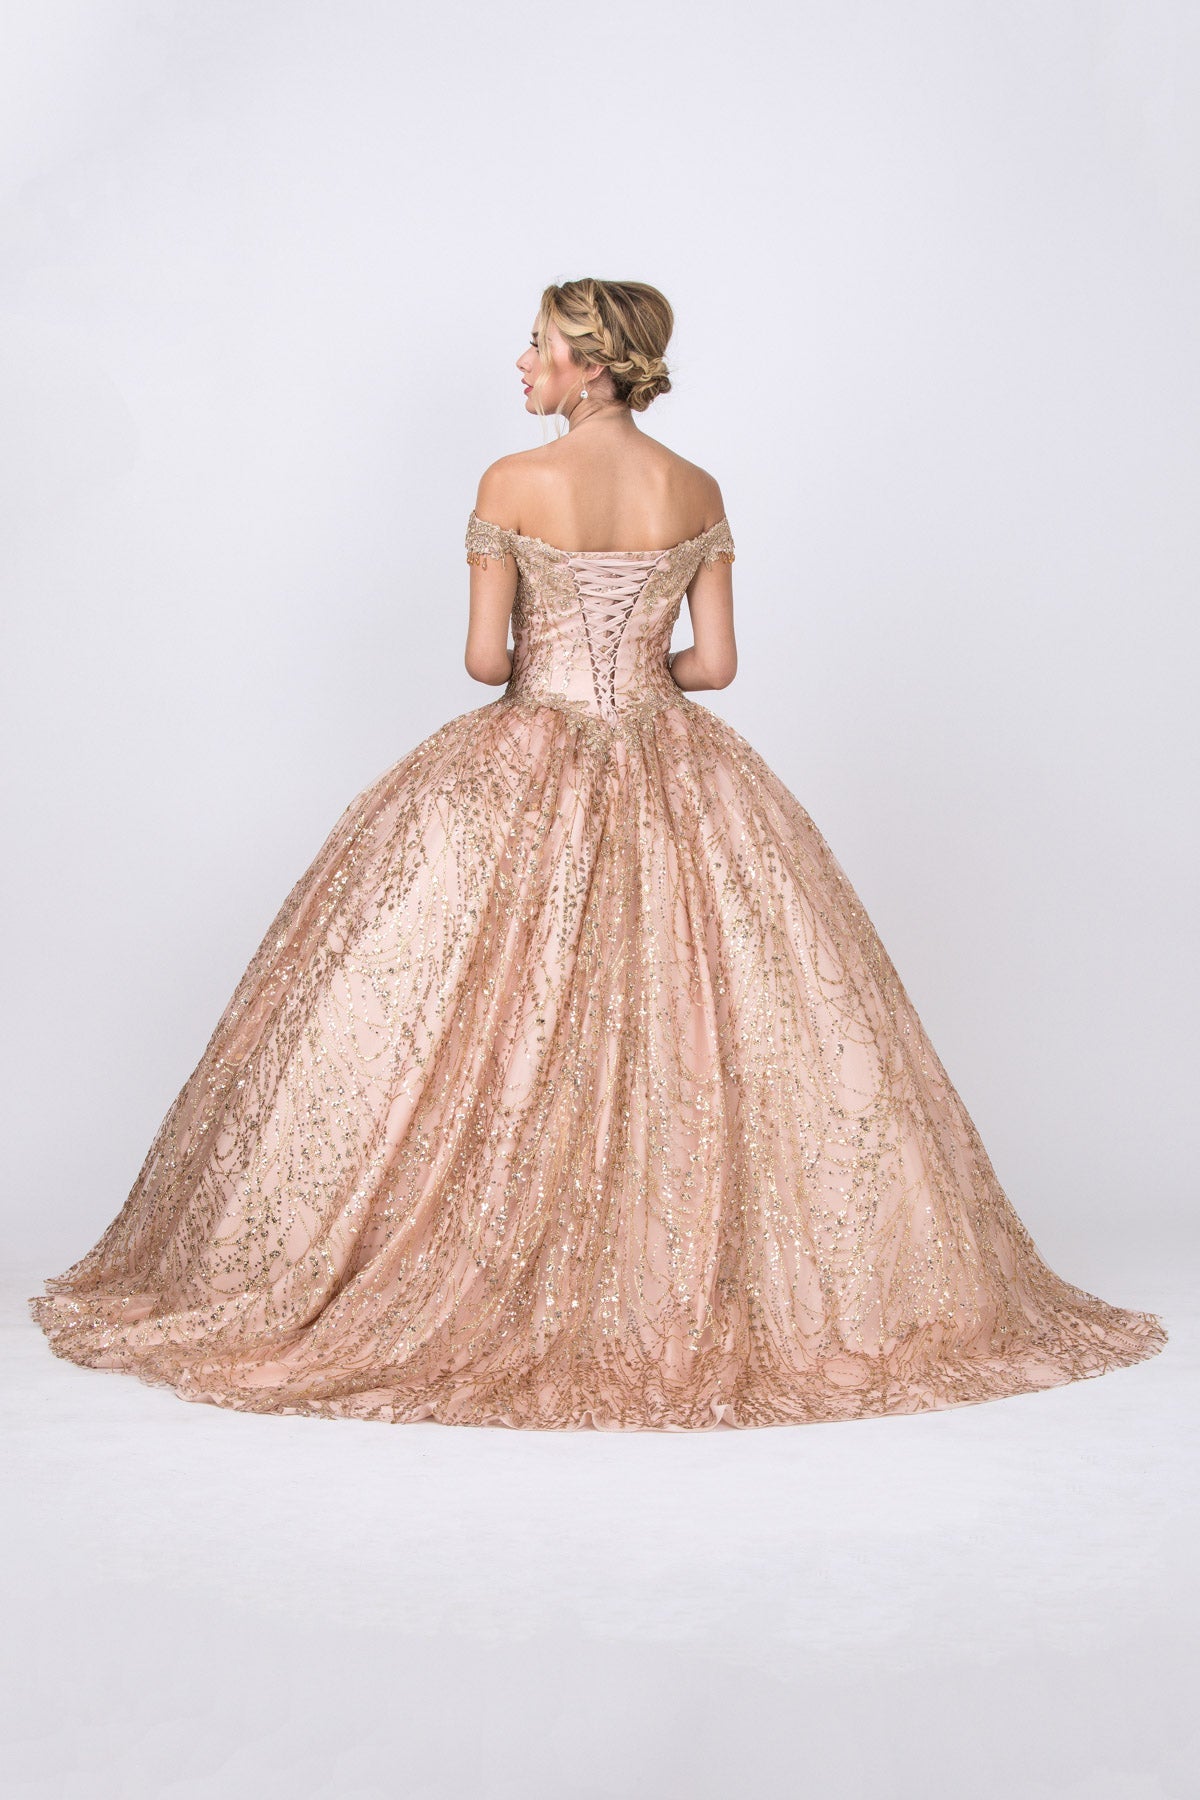 Aspeed L2364 Off Shoulder Lace & Sequin Quinceanera Dress - NORMA REED